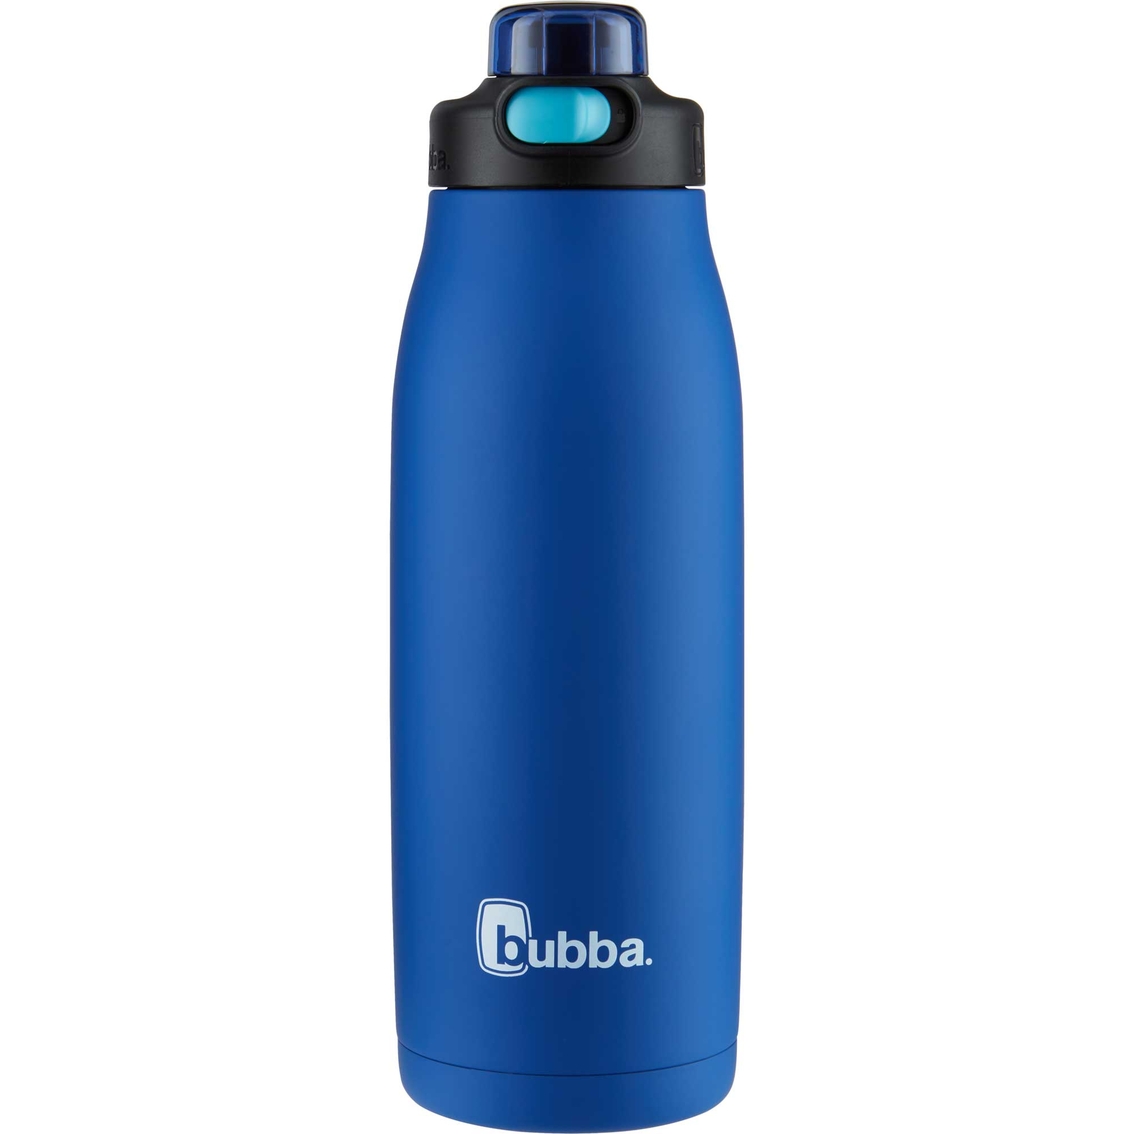 Bubba Radiant Stainless Steel Rubberized Water Bottle With Straw